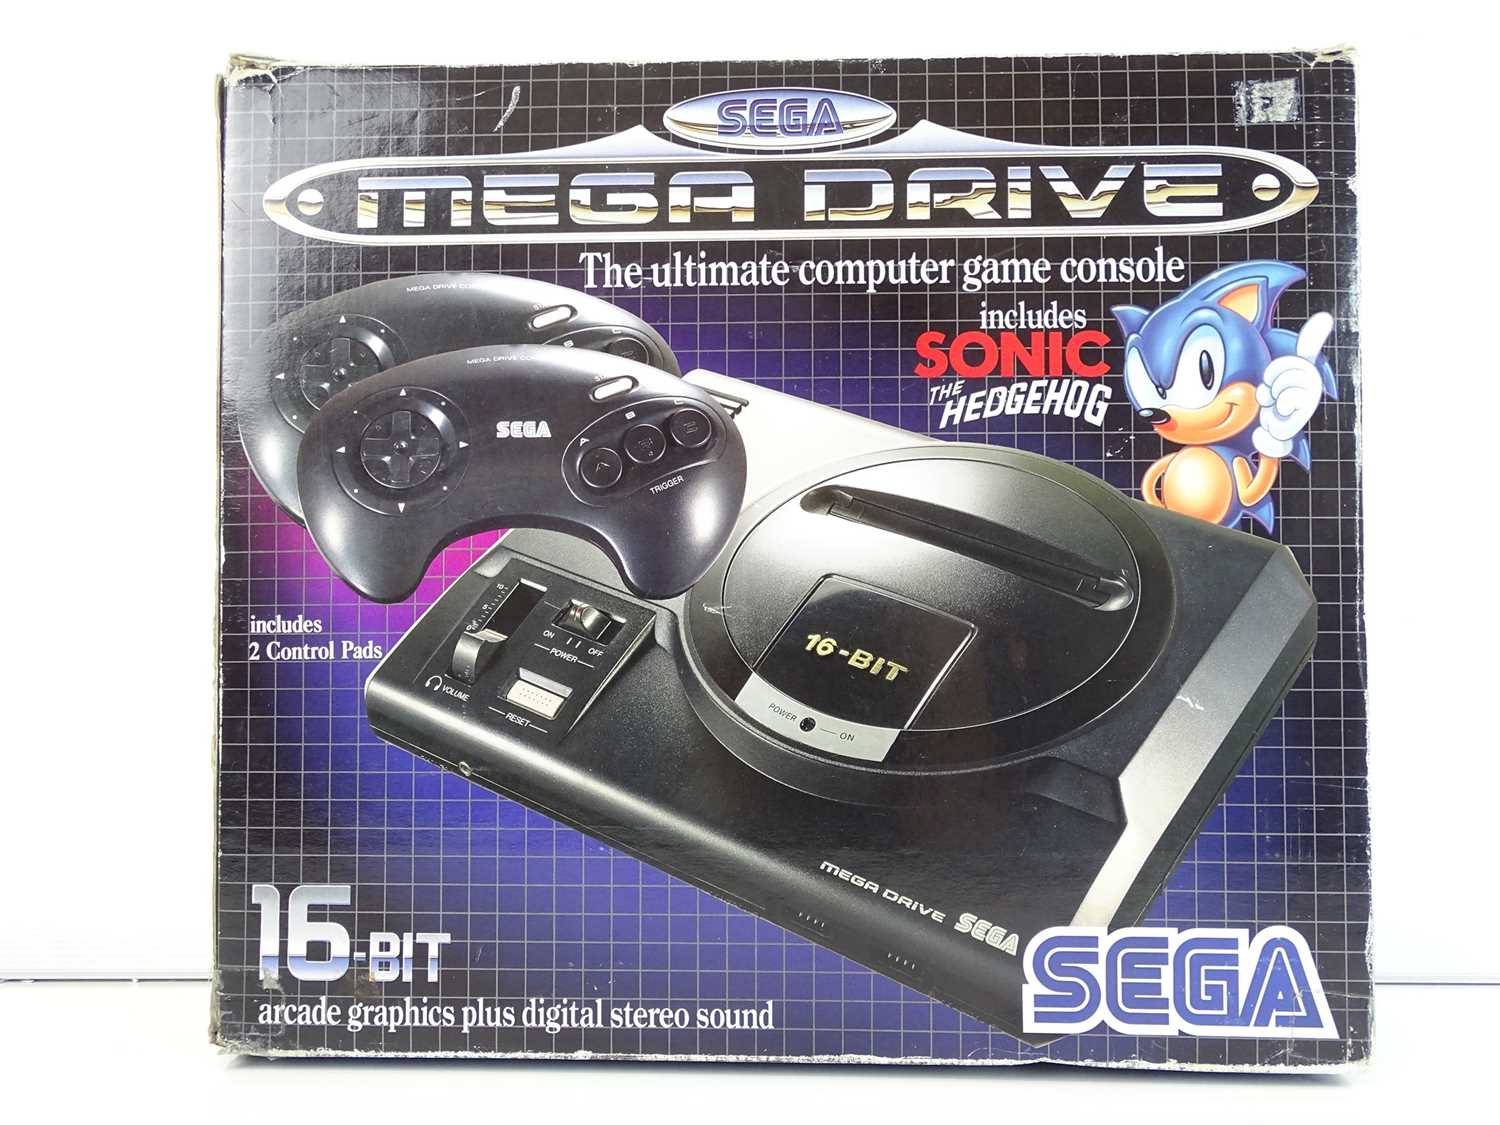 Sega Mega Drive video games console including Sonic the Hedgehog game - released in 1991 - in